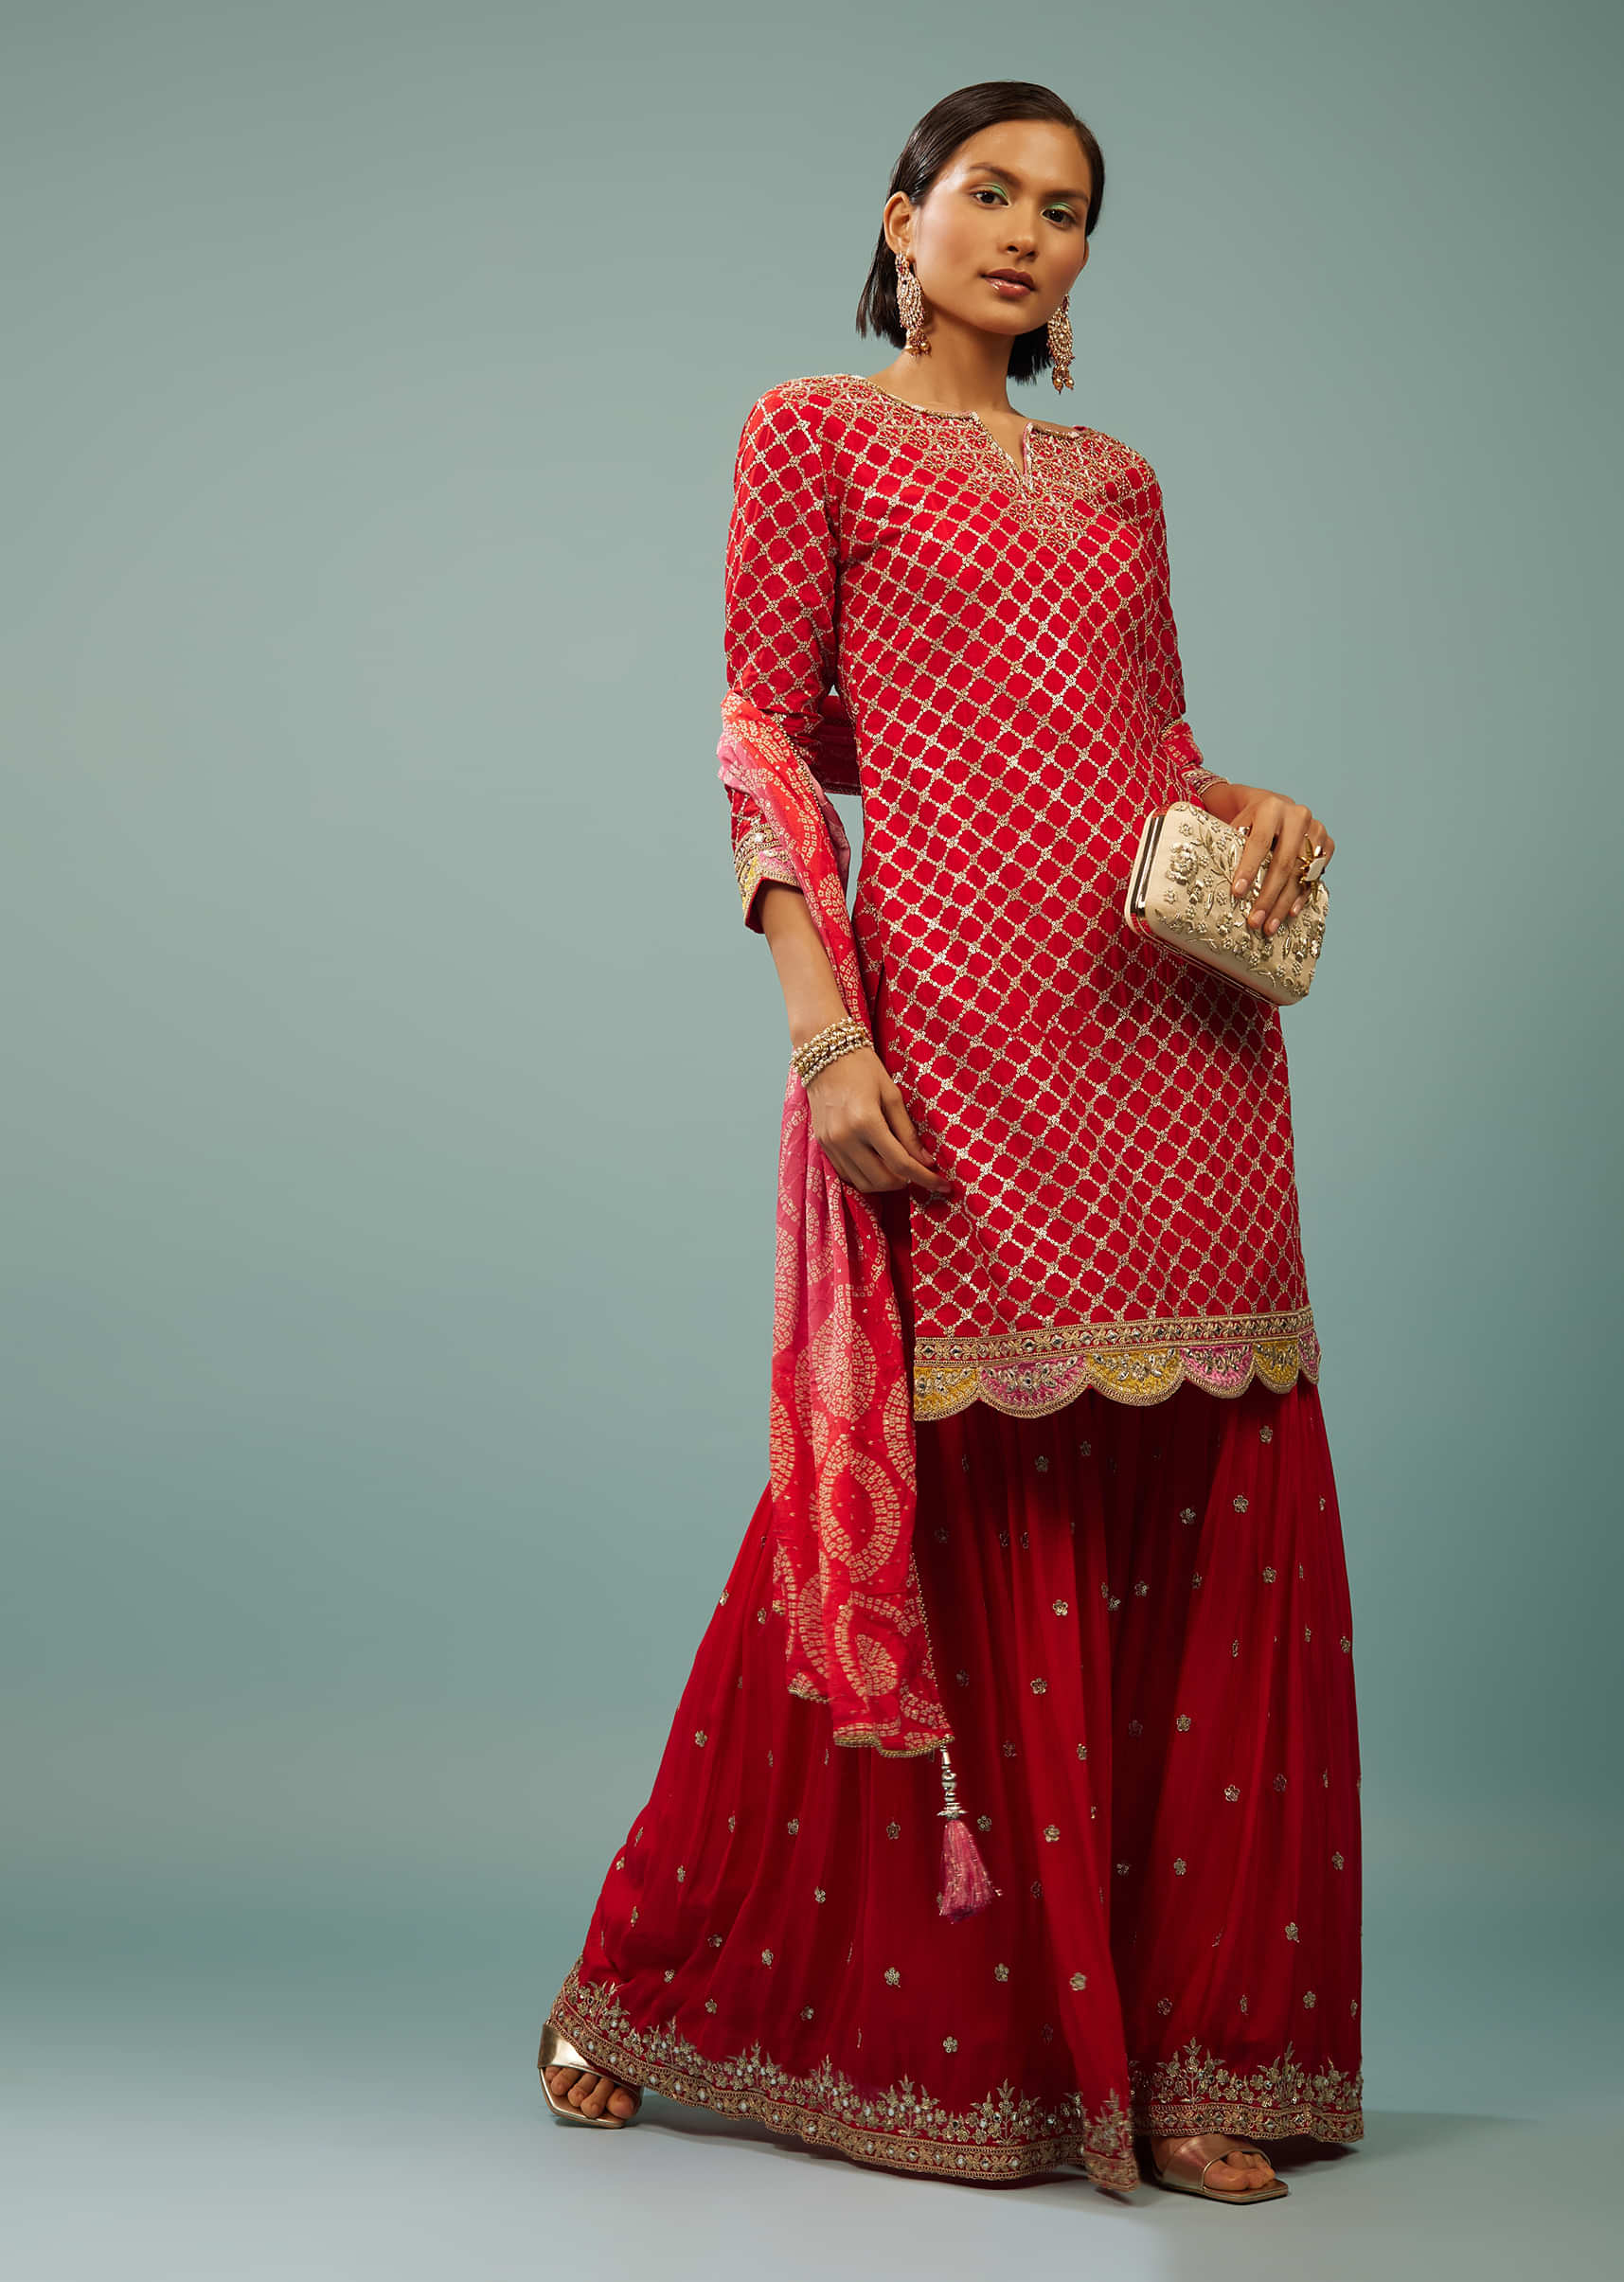 Fiery Red Sharara Suit With Embroidery And Bandhani Dupatta